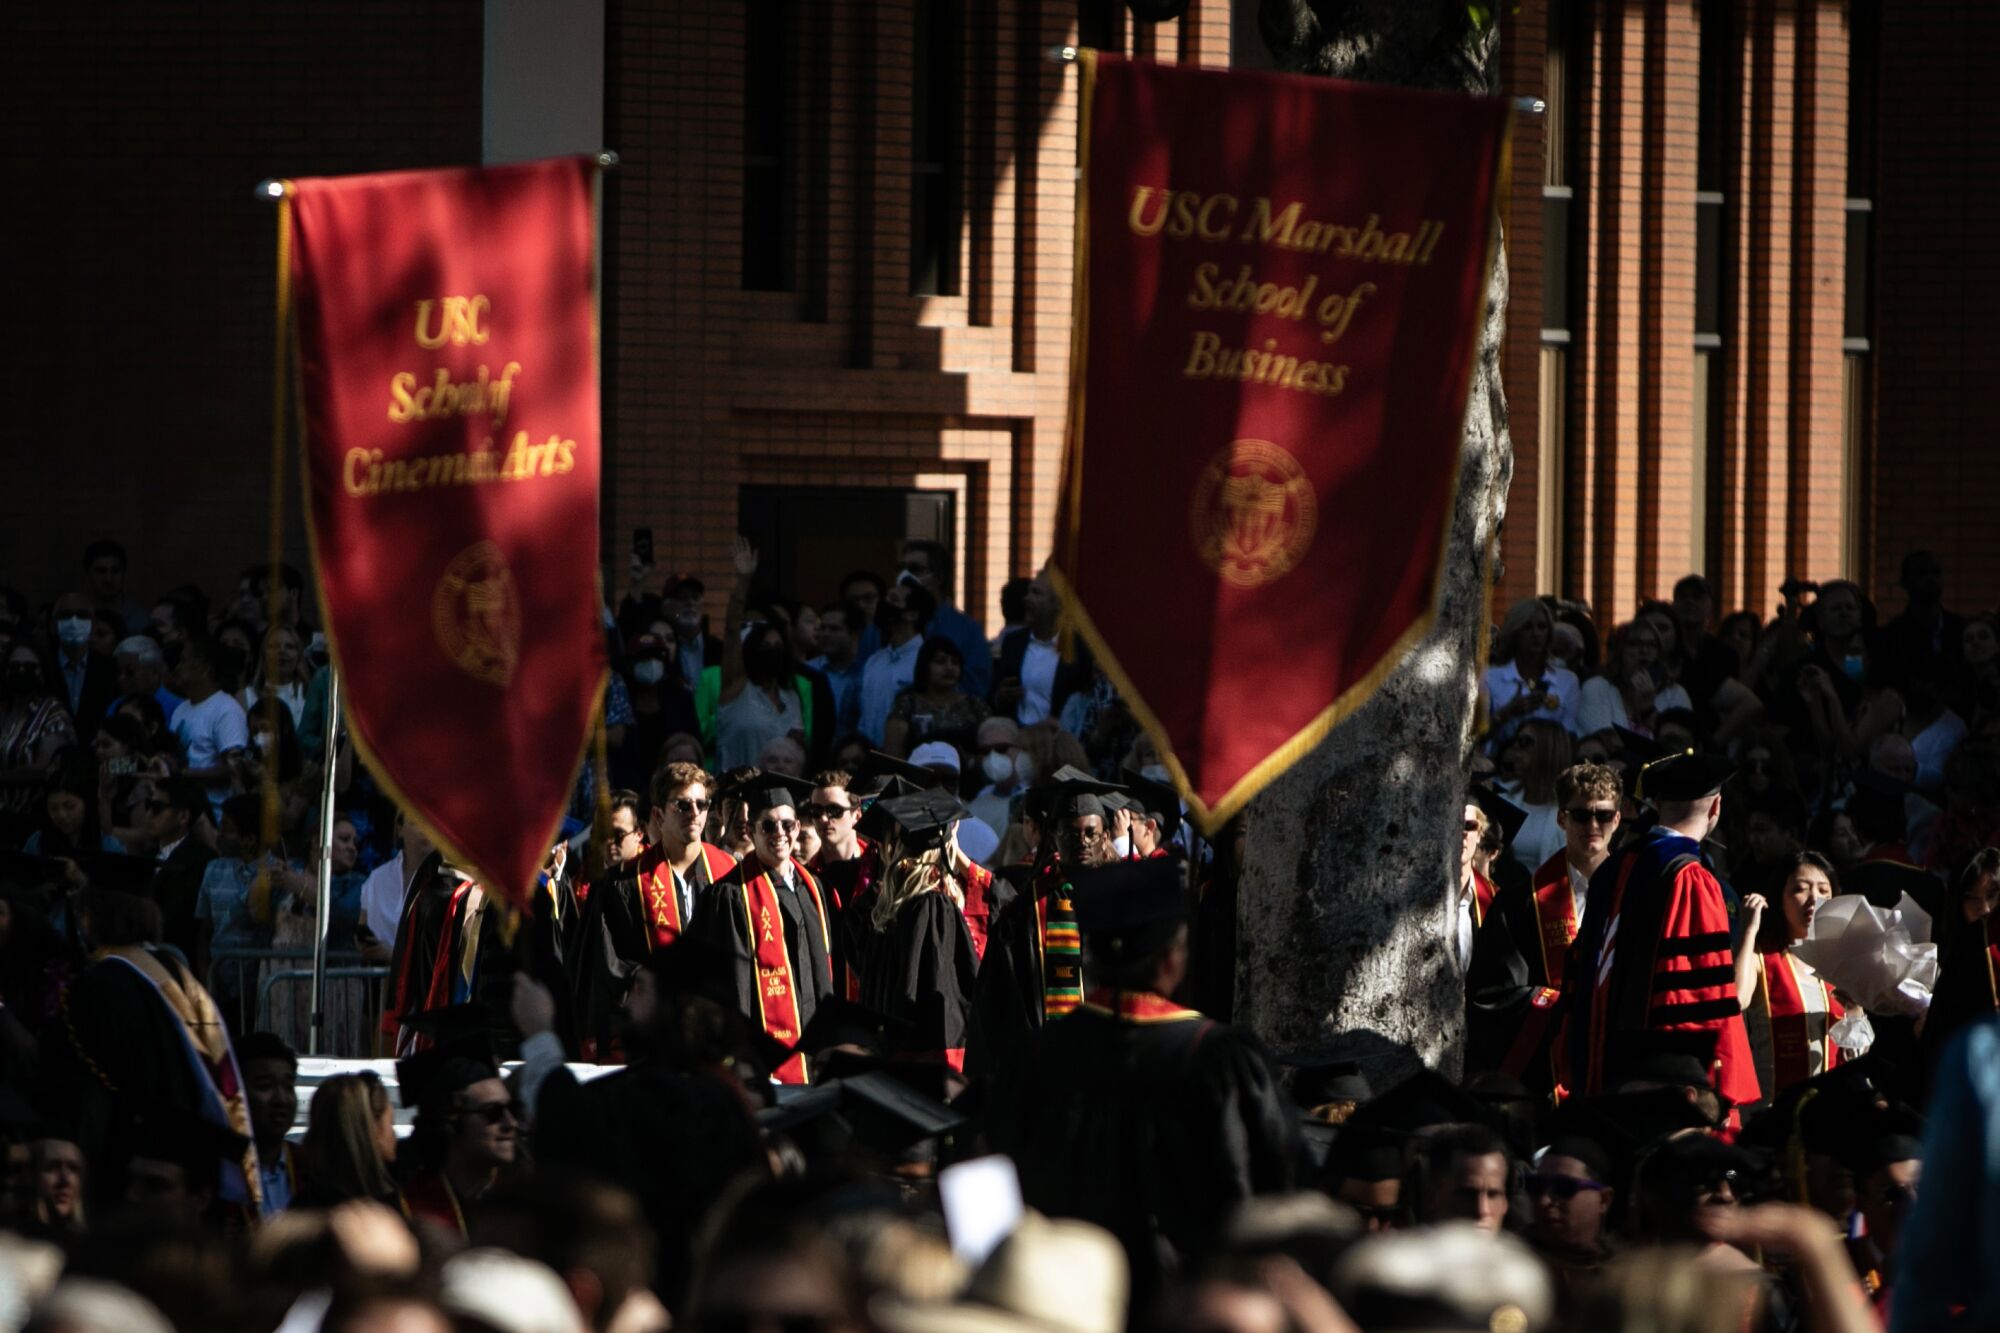 Graduates gather under banners for USC School of Cinema Arts and USC Marshall School of Business.